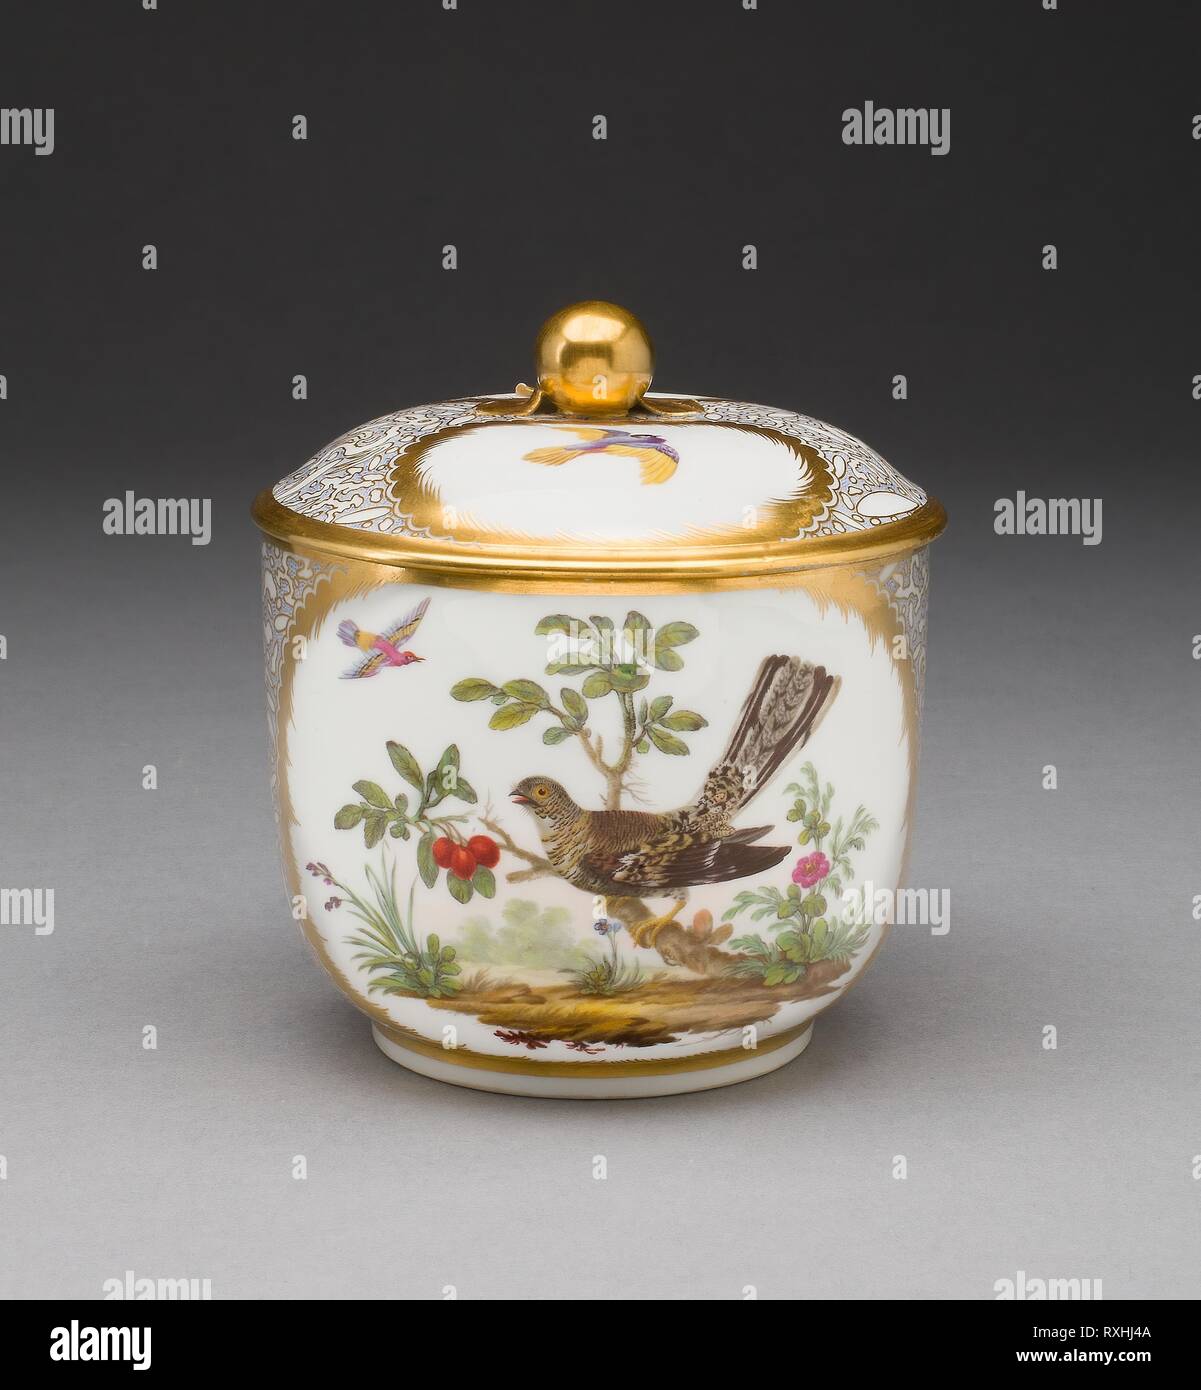 Sugar Bowl. Sèvres Porcelain Manufactory; French, founded 1740; Painted by  Philippe Castel (attributed to); French, 1772-1796. Date: 1781. Dimensions:  11 x 10.5 cm (4 5/16 x 4 1/8 in.). Hard-paste porcelain, polychrome